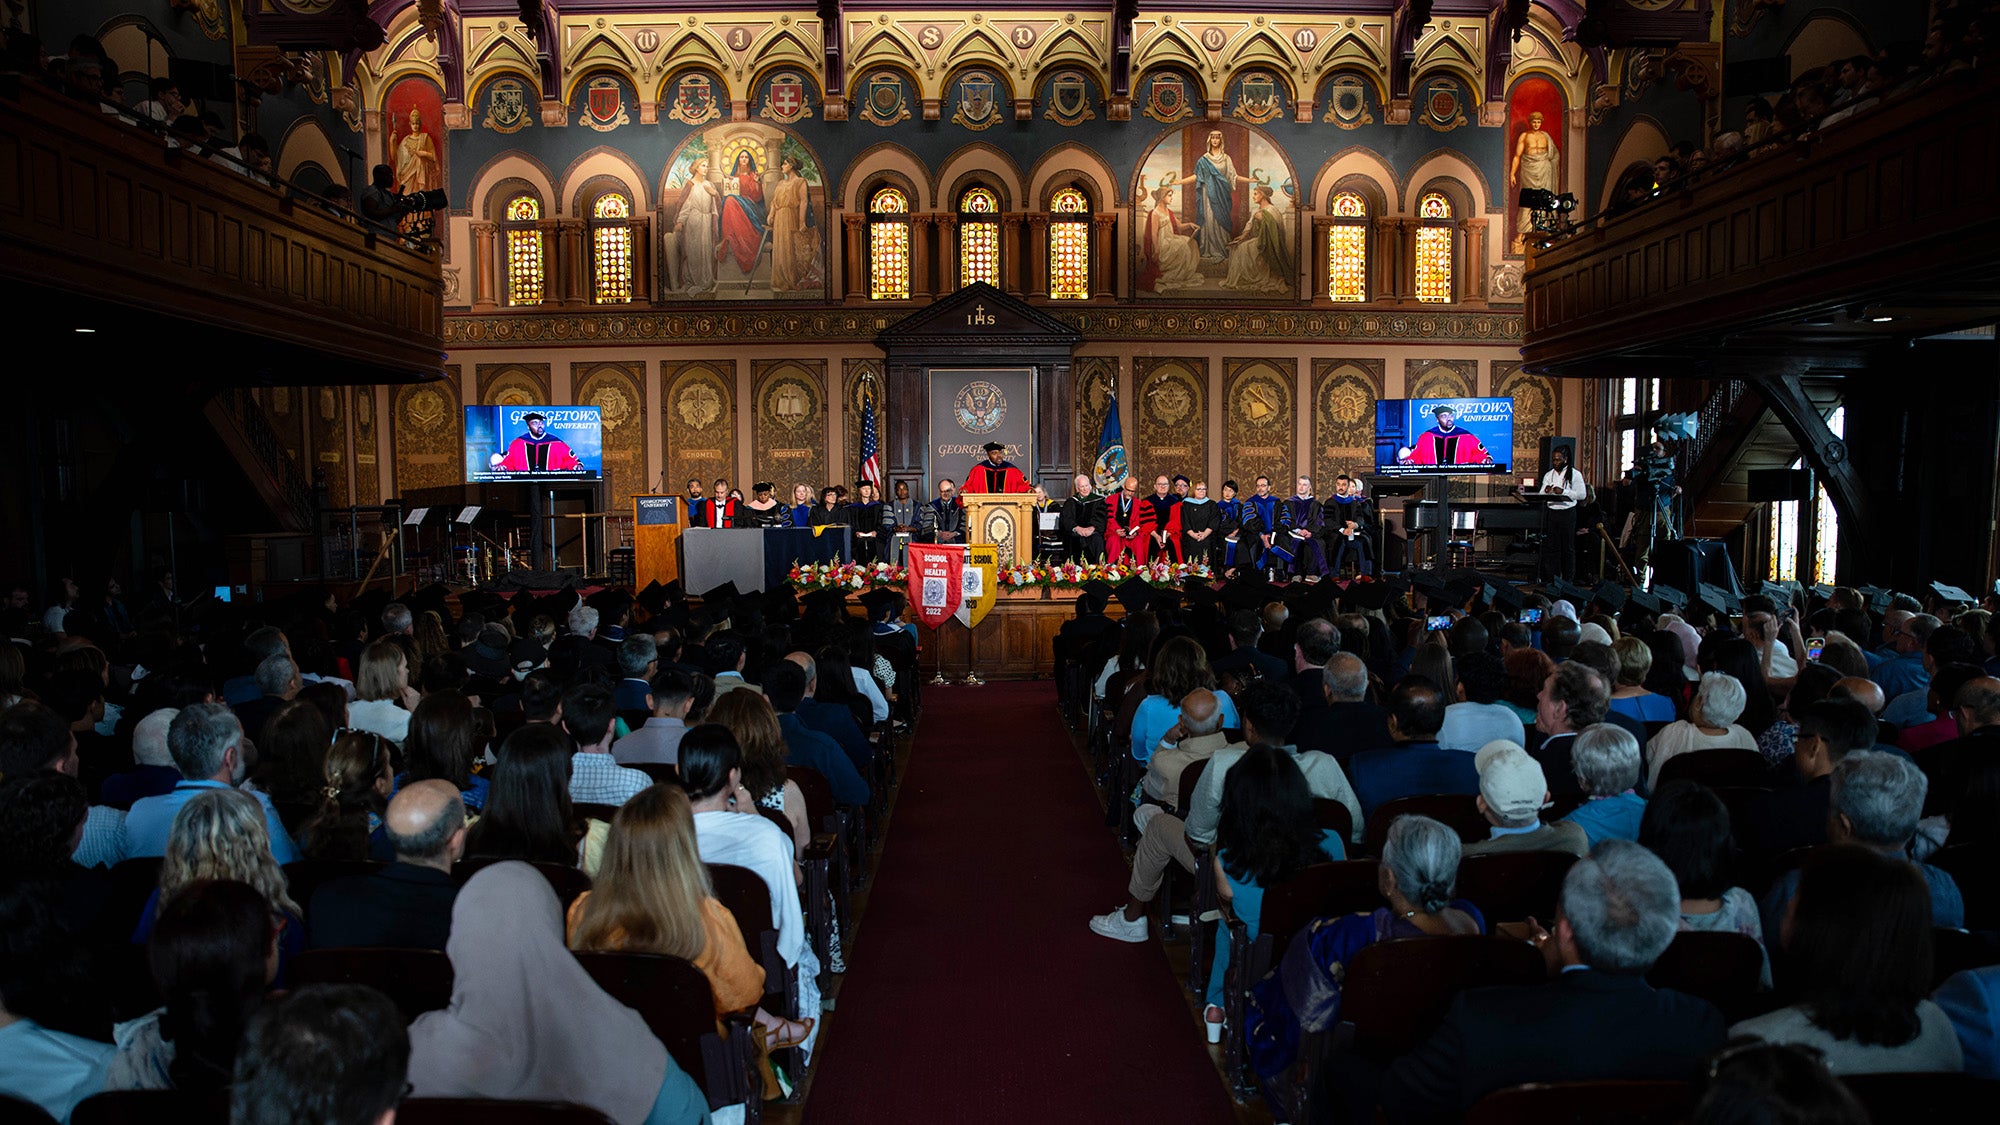 The stage in Gaston Hall during the School of Health Commencement ceremony